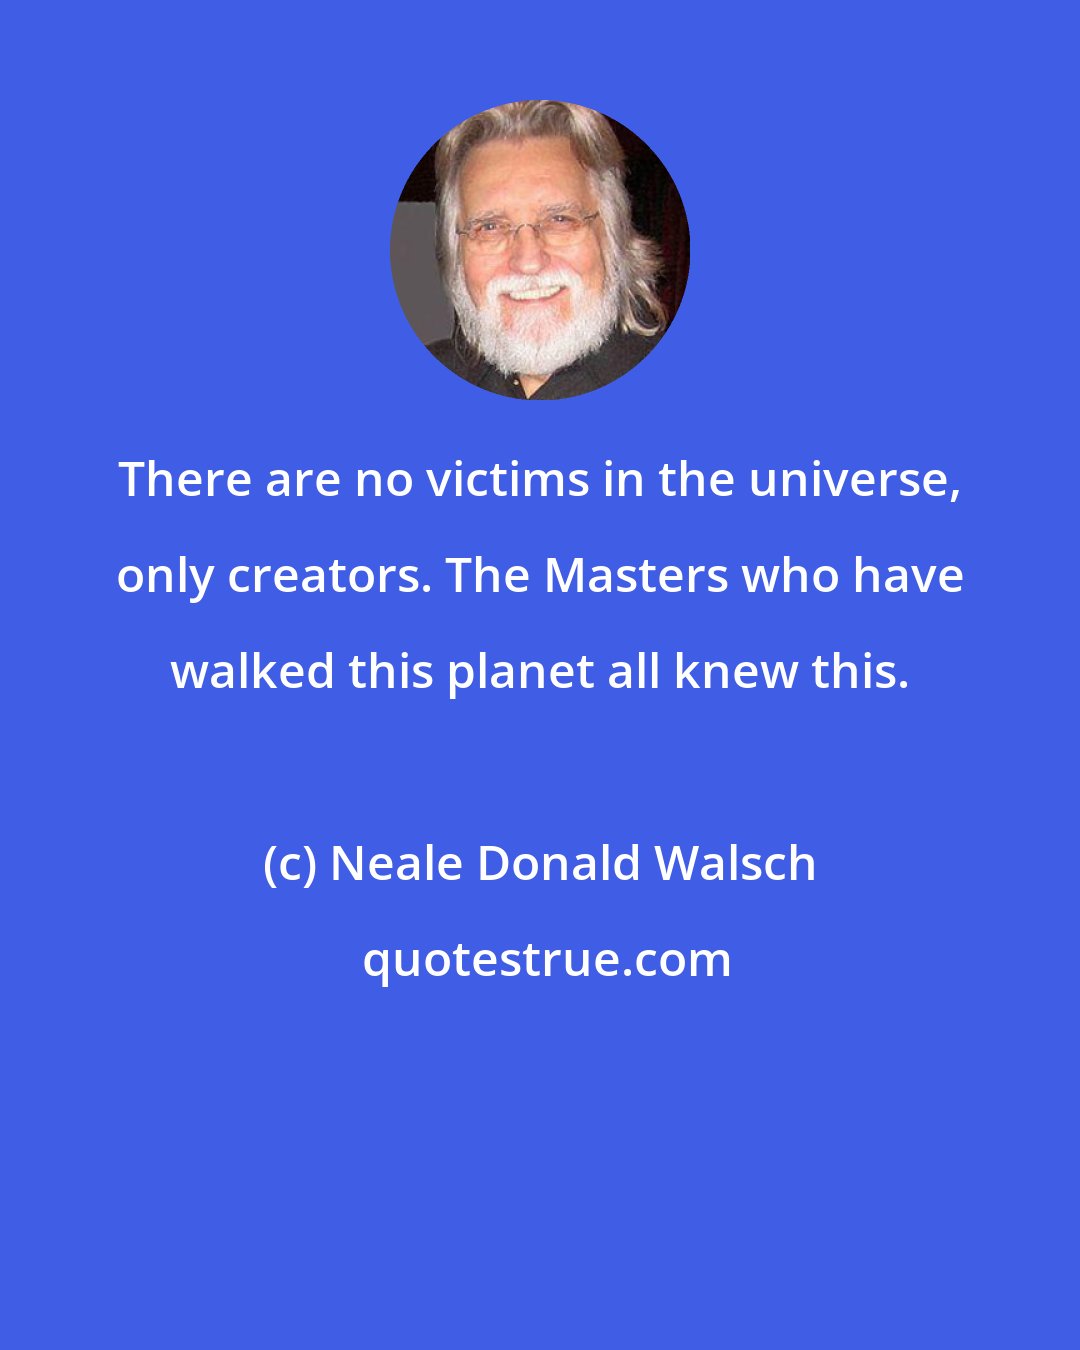 Neale Donald Walsch: There are no victims in the universe, only creators. The Masters who have walked this planet all knew this.